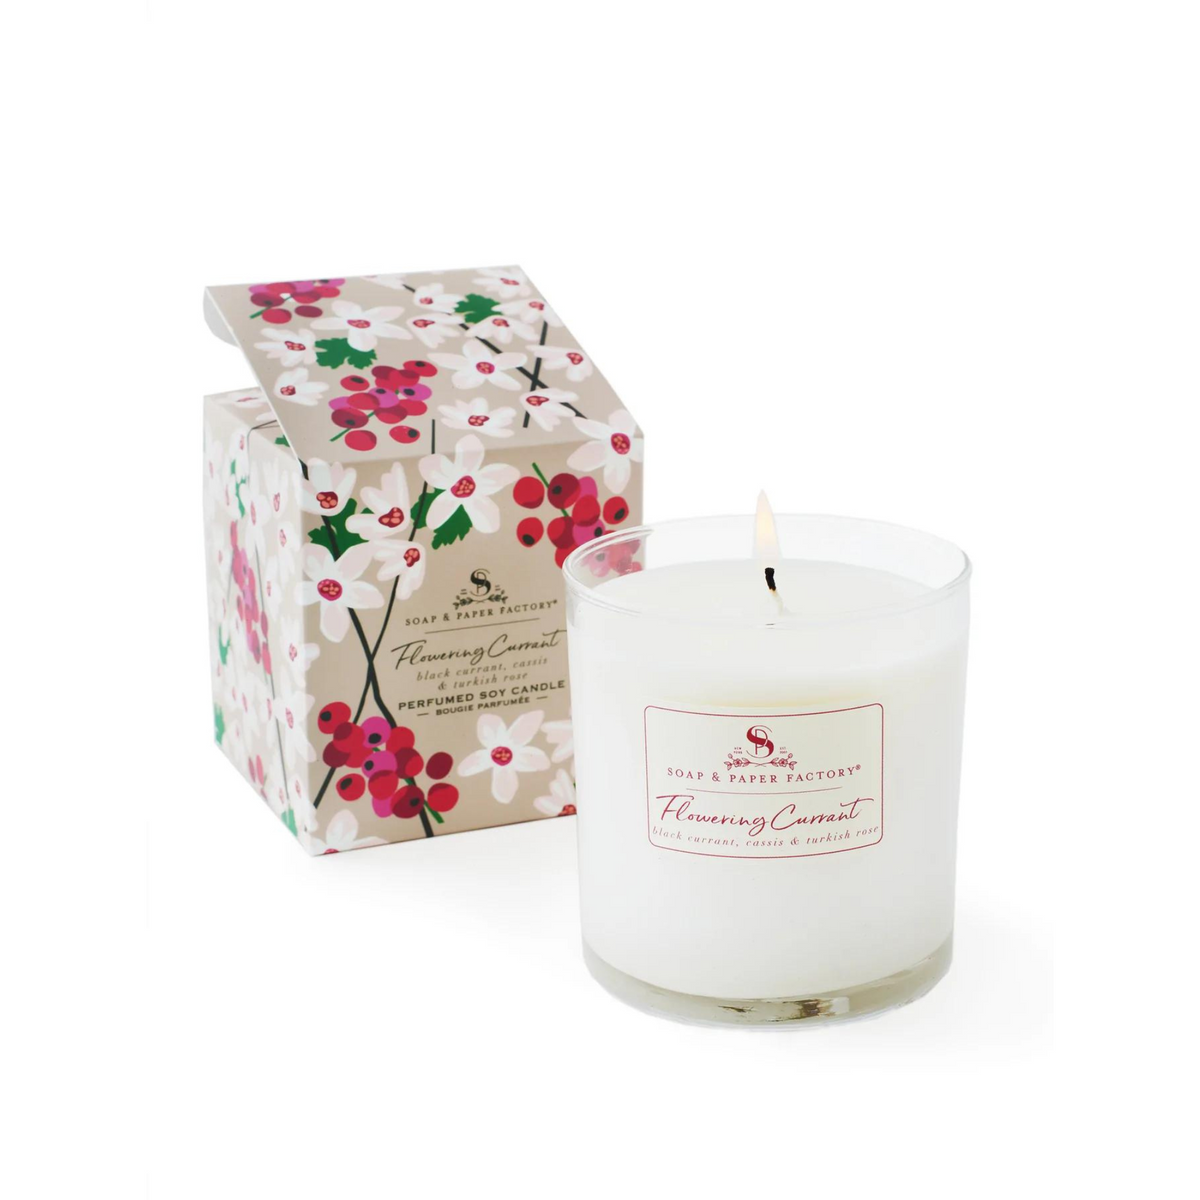 Primary Image of Soap & Paper Factory Flowering Currant Large Soy Candle (9.5 oz)